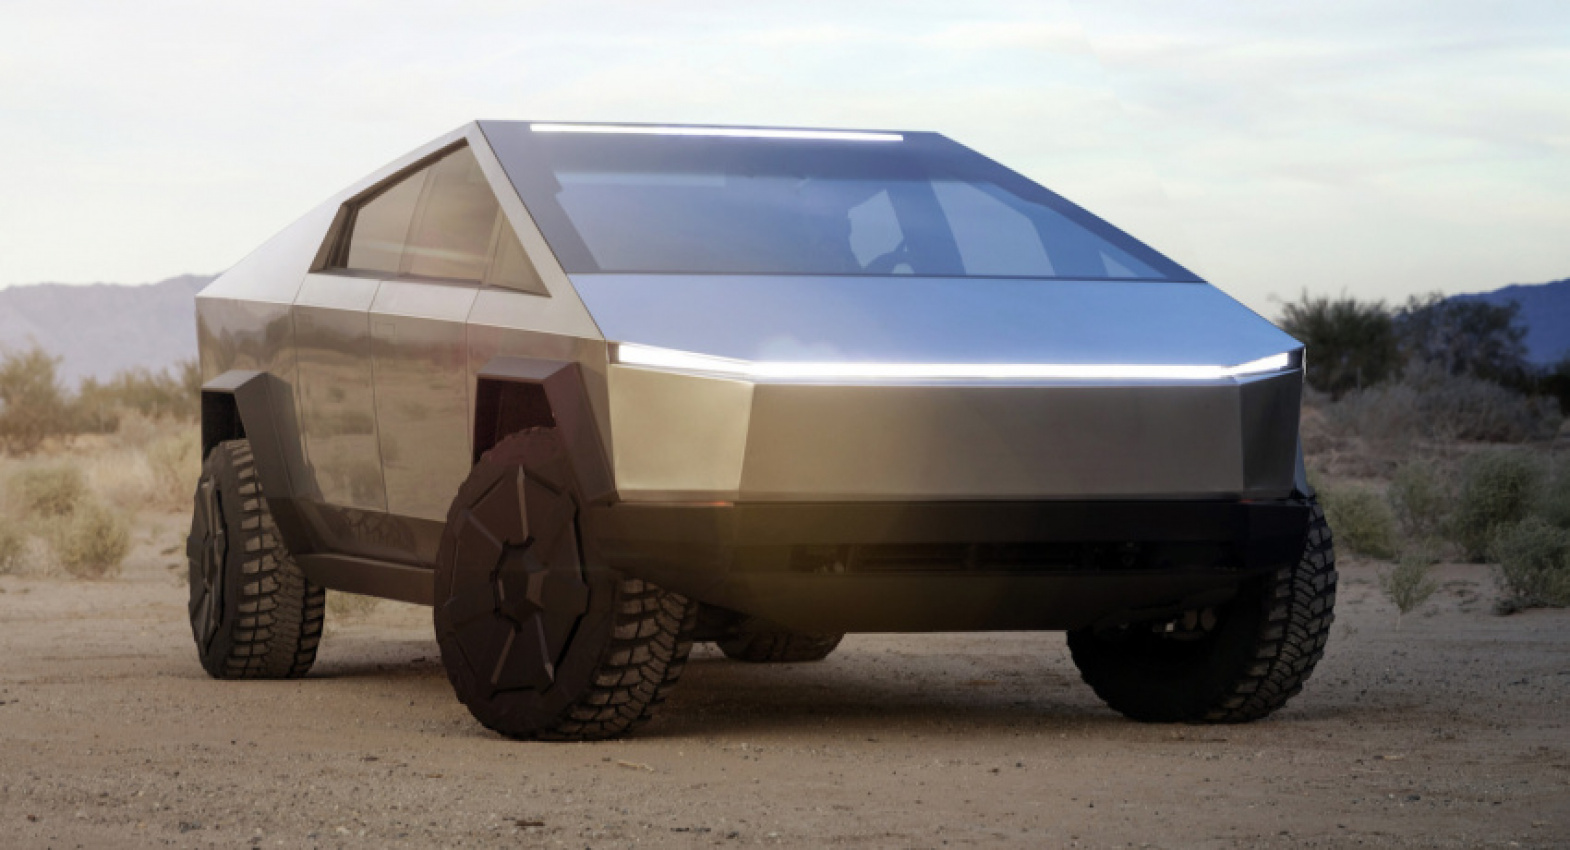 autos, cars, news, tesla, cybertruck, electric vehicles, elon musk, reports, tesla cybertruck, tesla model 2, tesla won’t launch new models in 2022, cybertruck delayed until 2023, entry-level $25,000 ev on hold